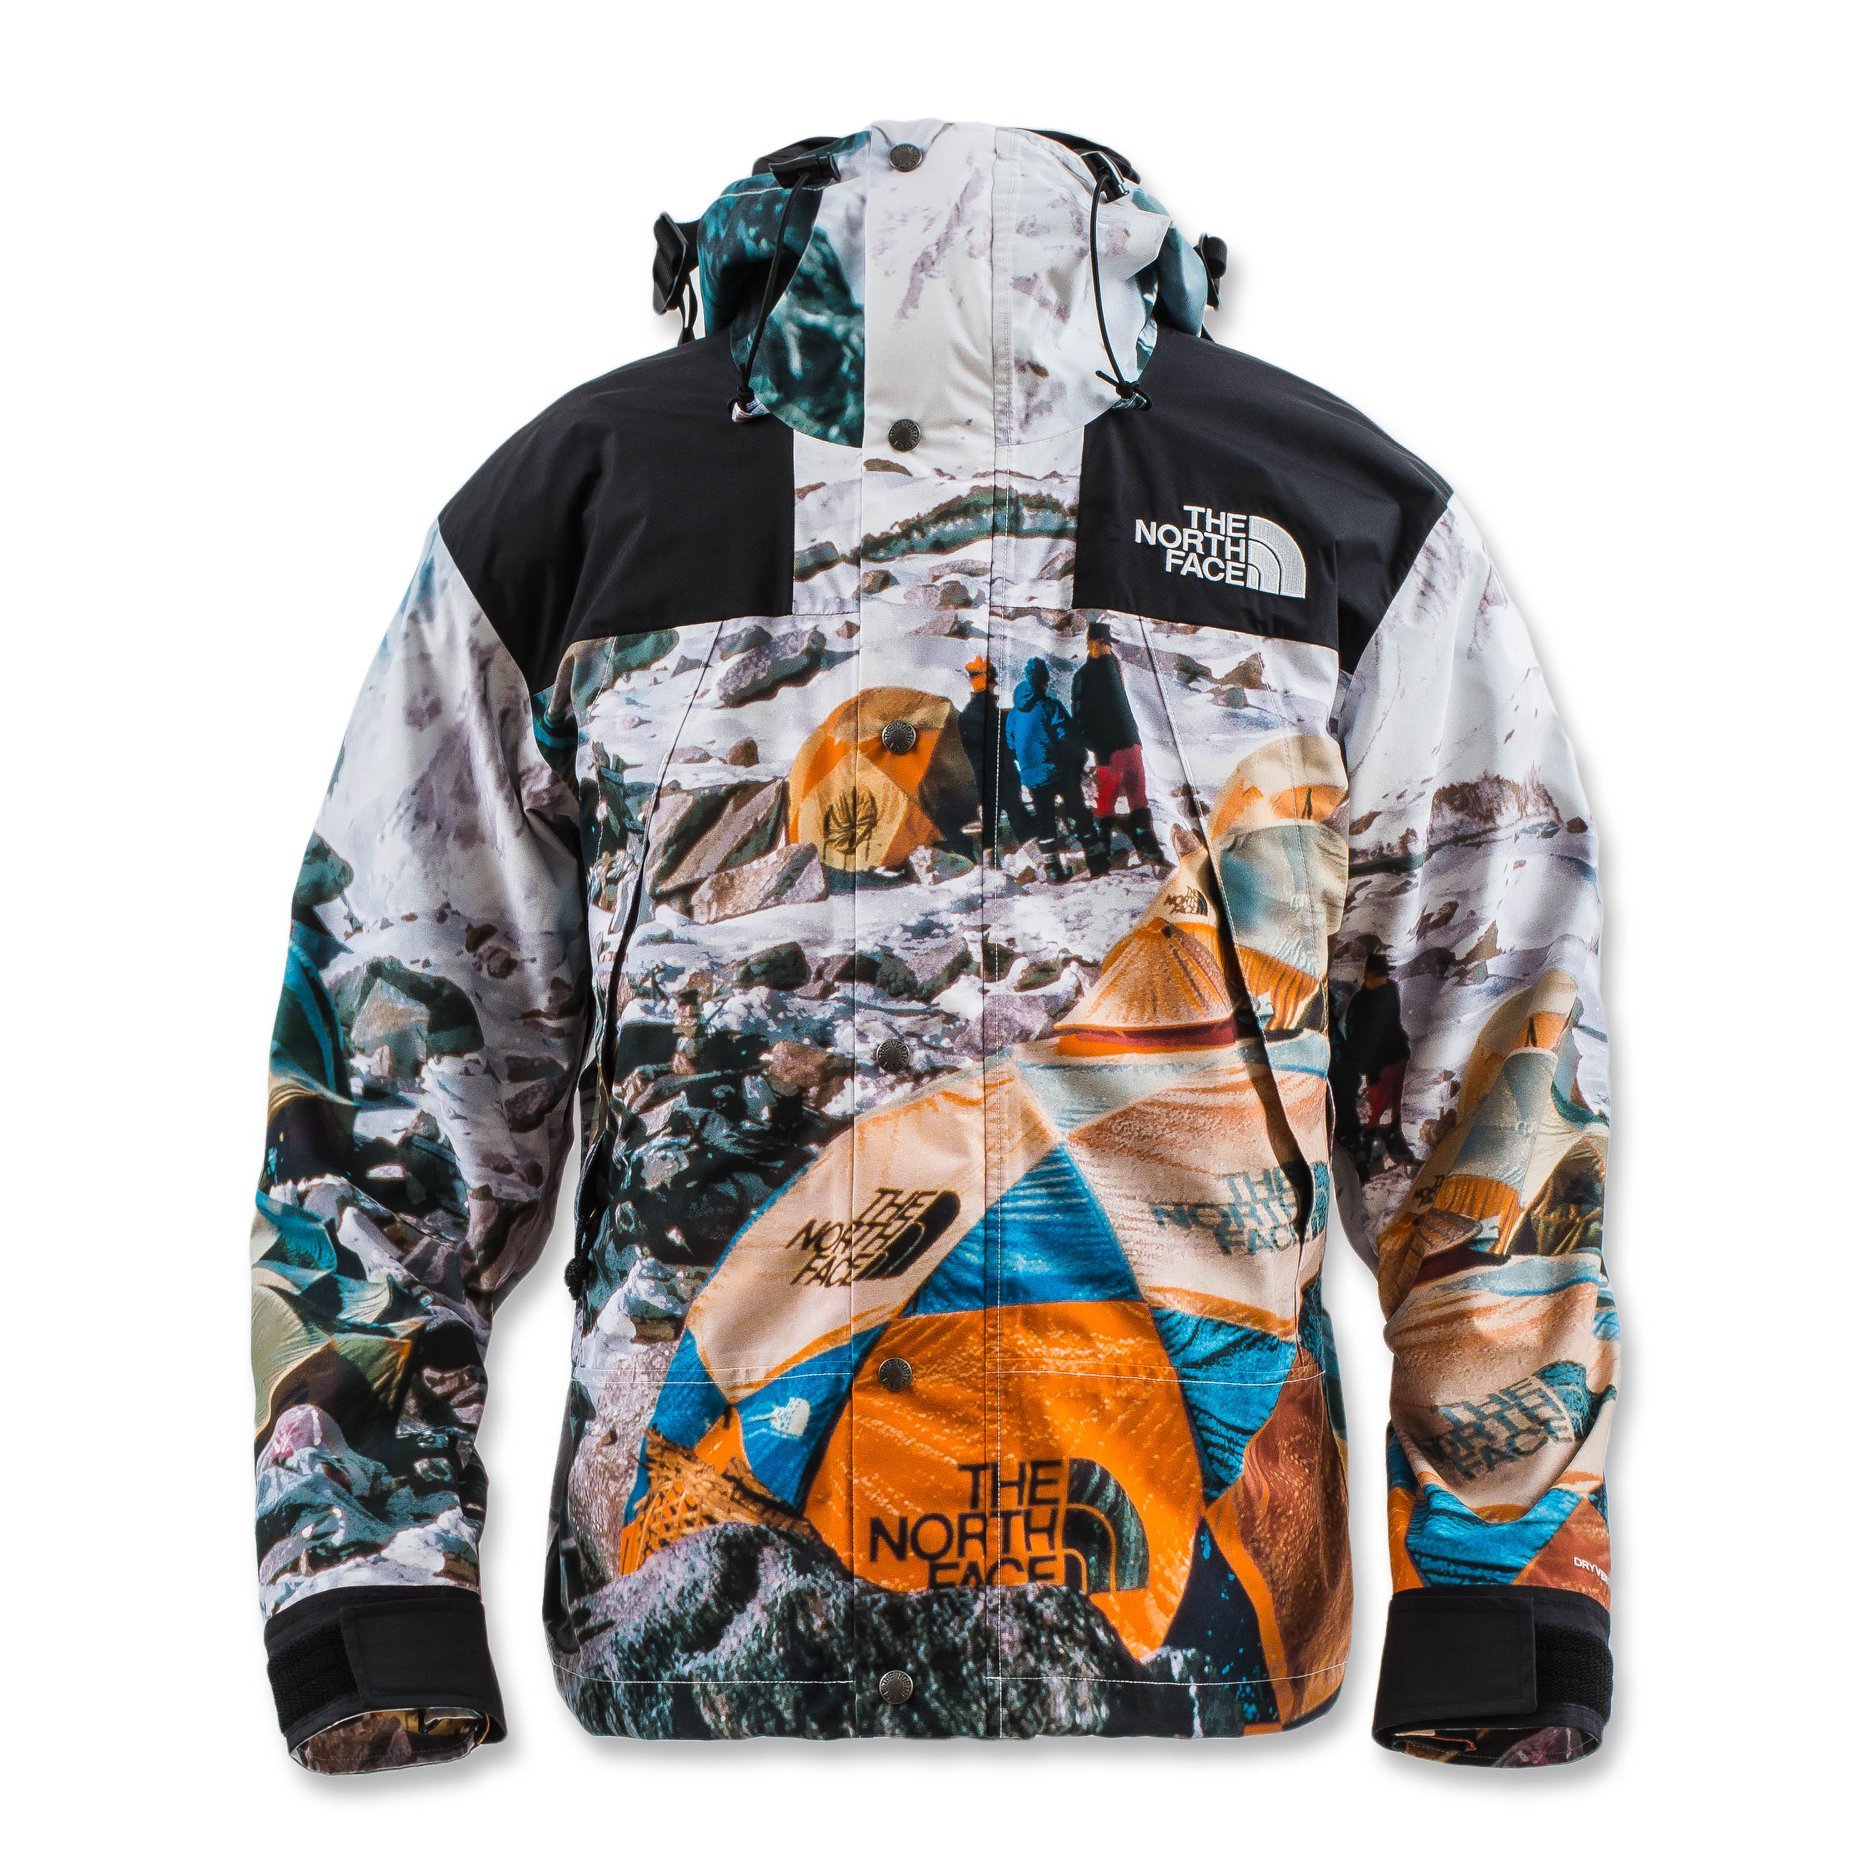 IMPRESSION】INVINCIBLE x THE NORTH FACE MOUNTAIN JACKET 現貨